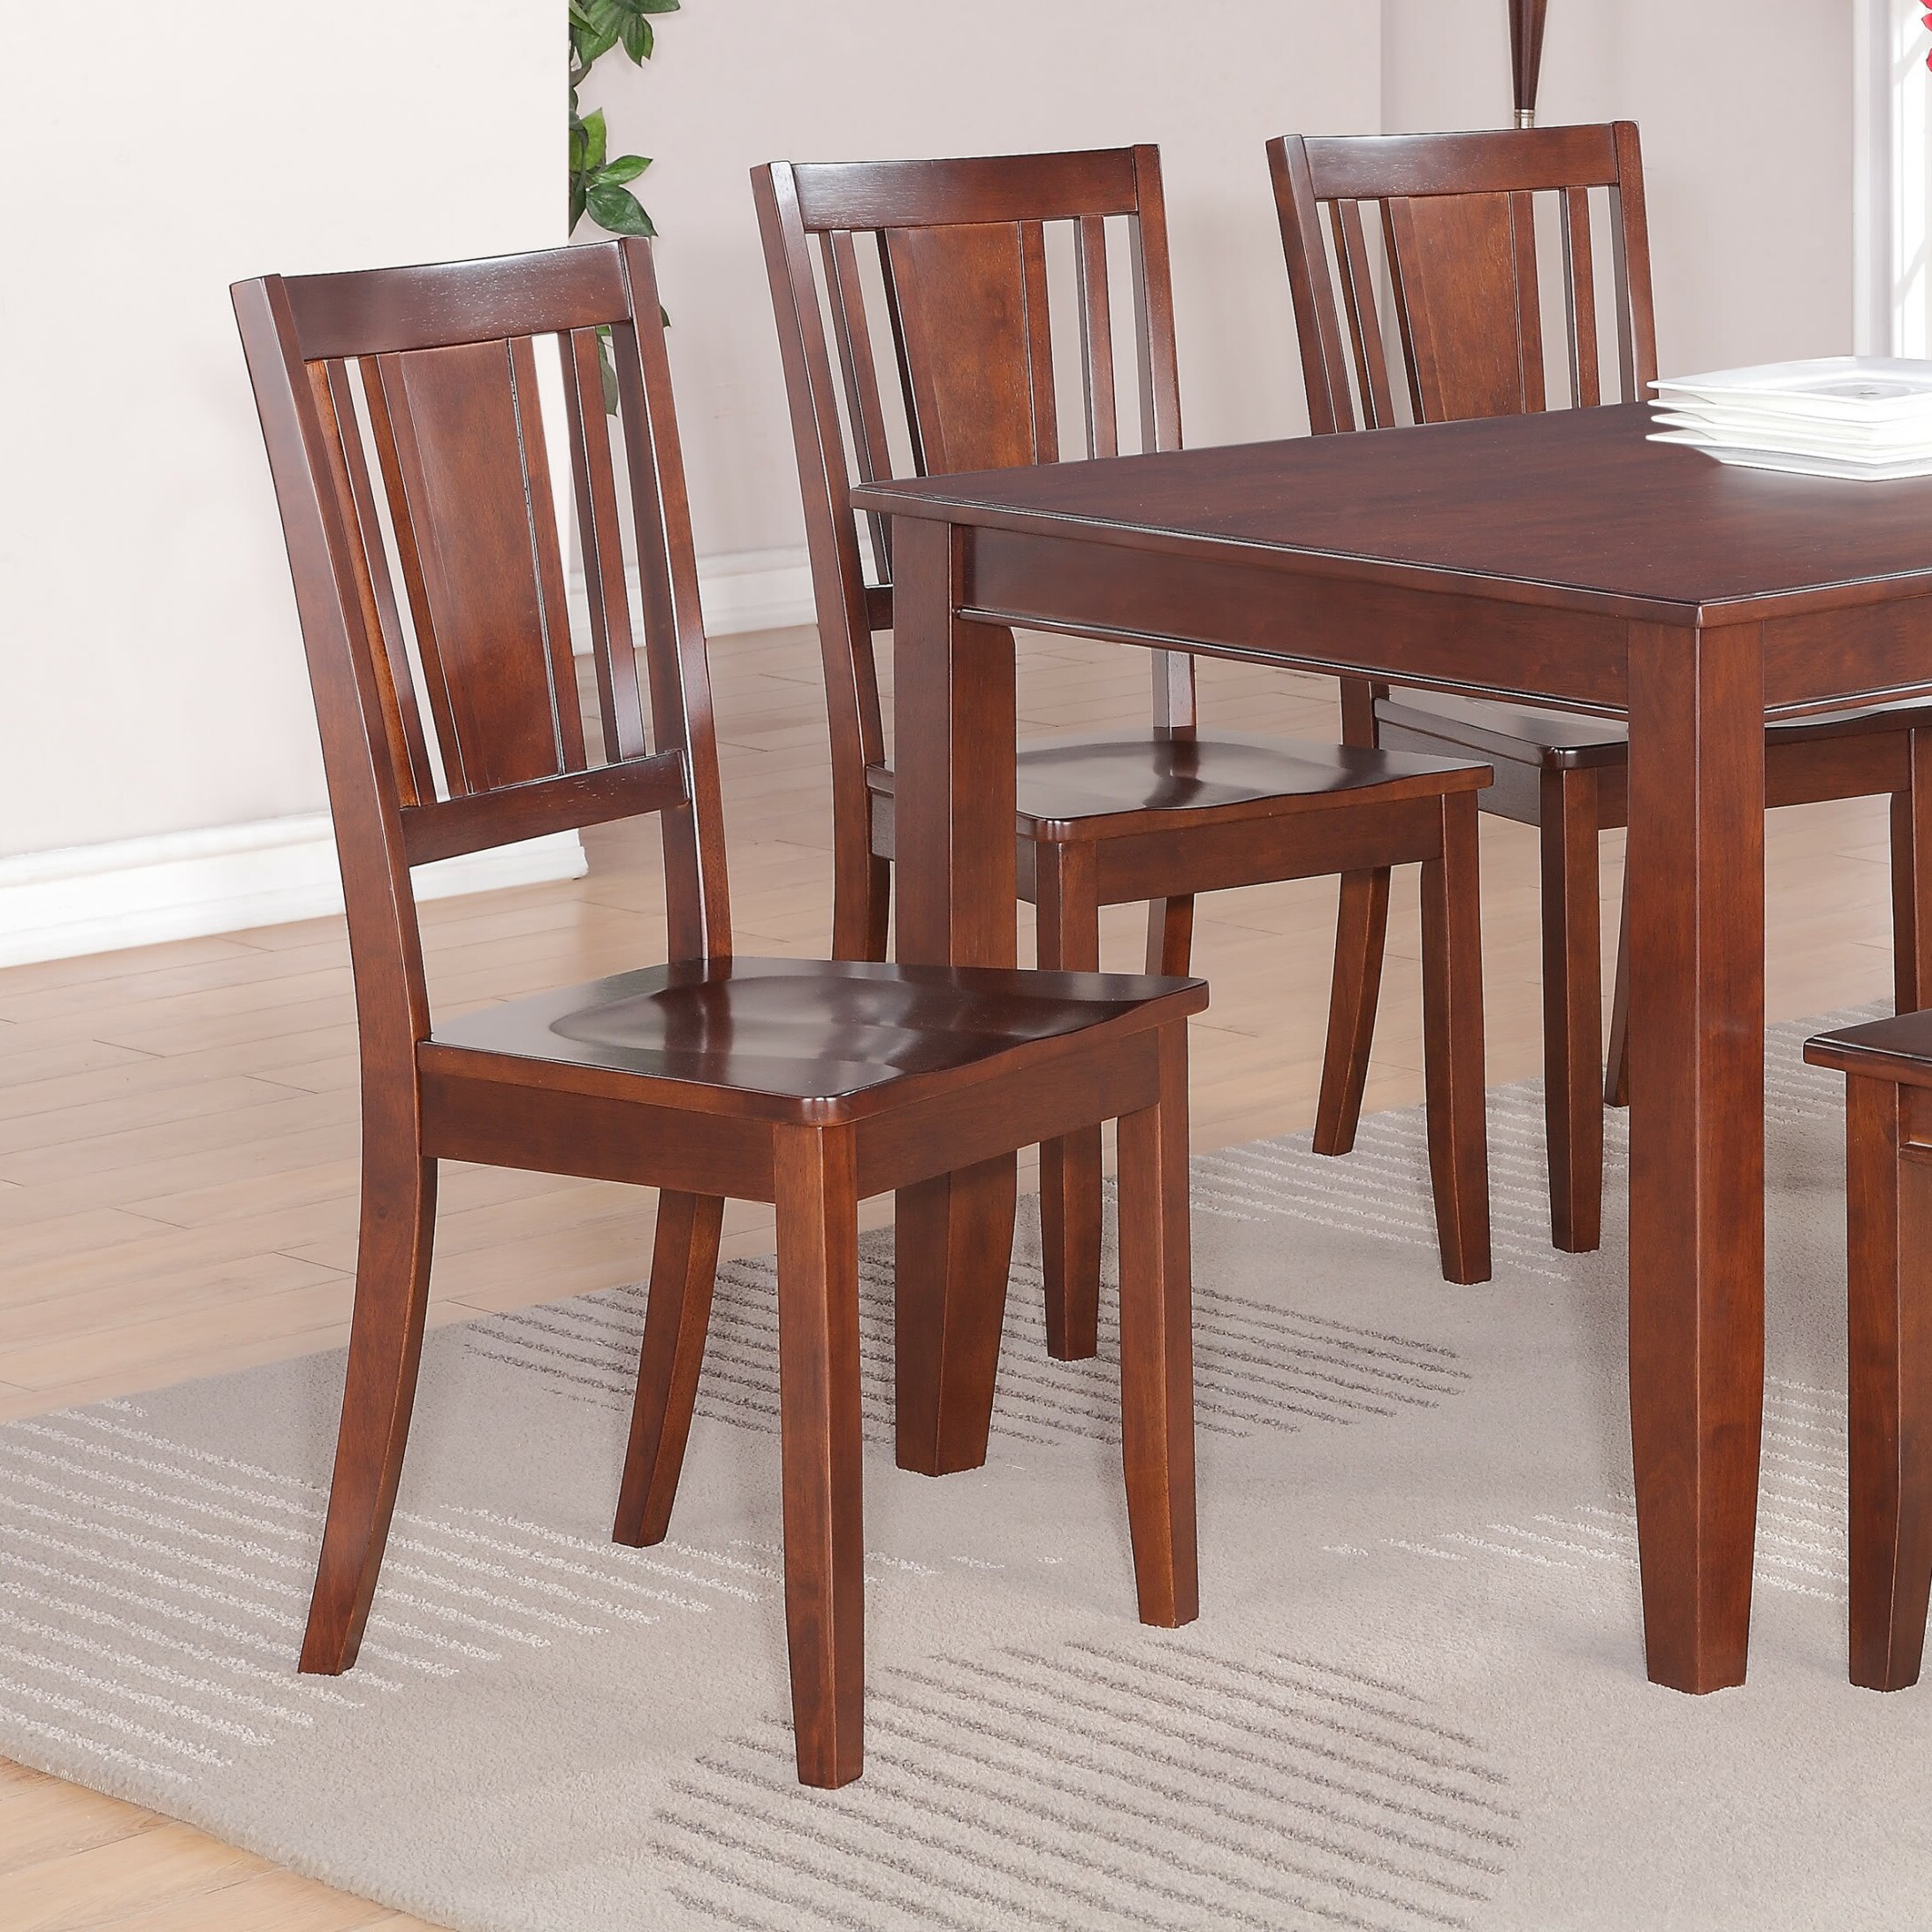 Wooden Importers Dudley Side Chair with Wood Seat &amp; Reviews | Wayfair